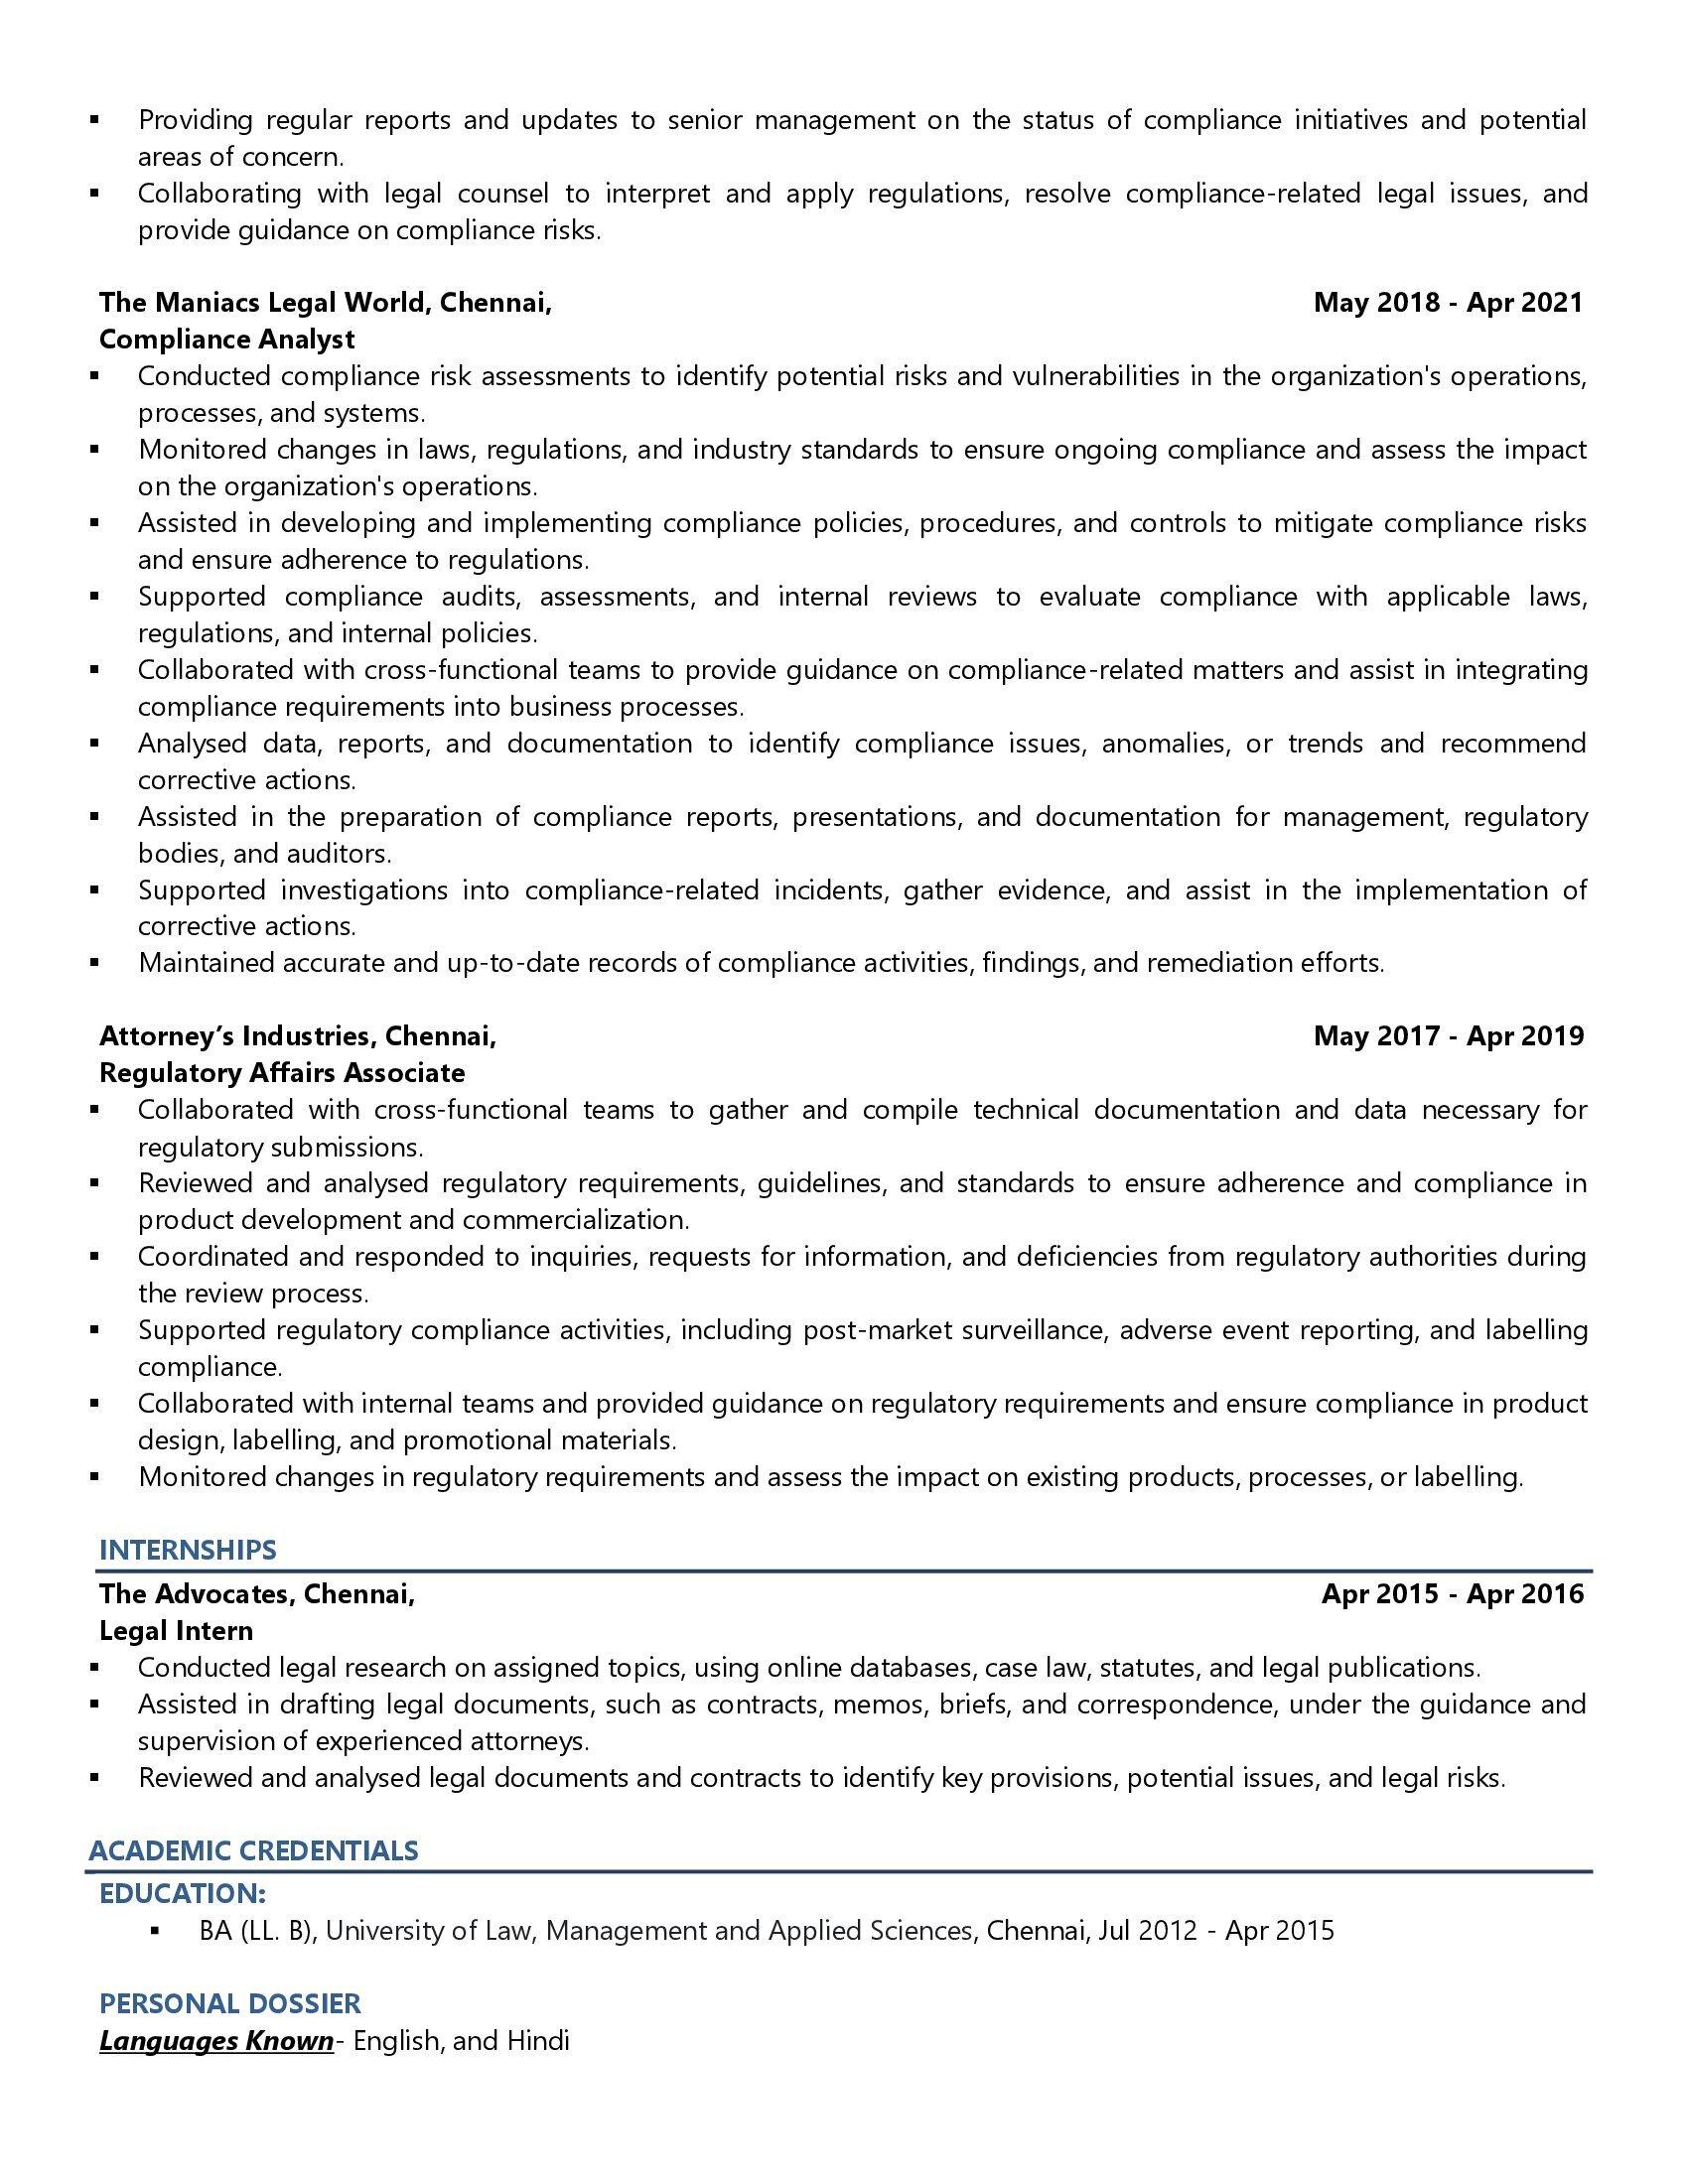 Regulatory Compliance Manager - Resume Example & Template